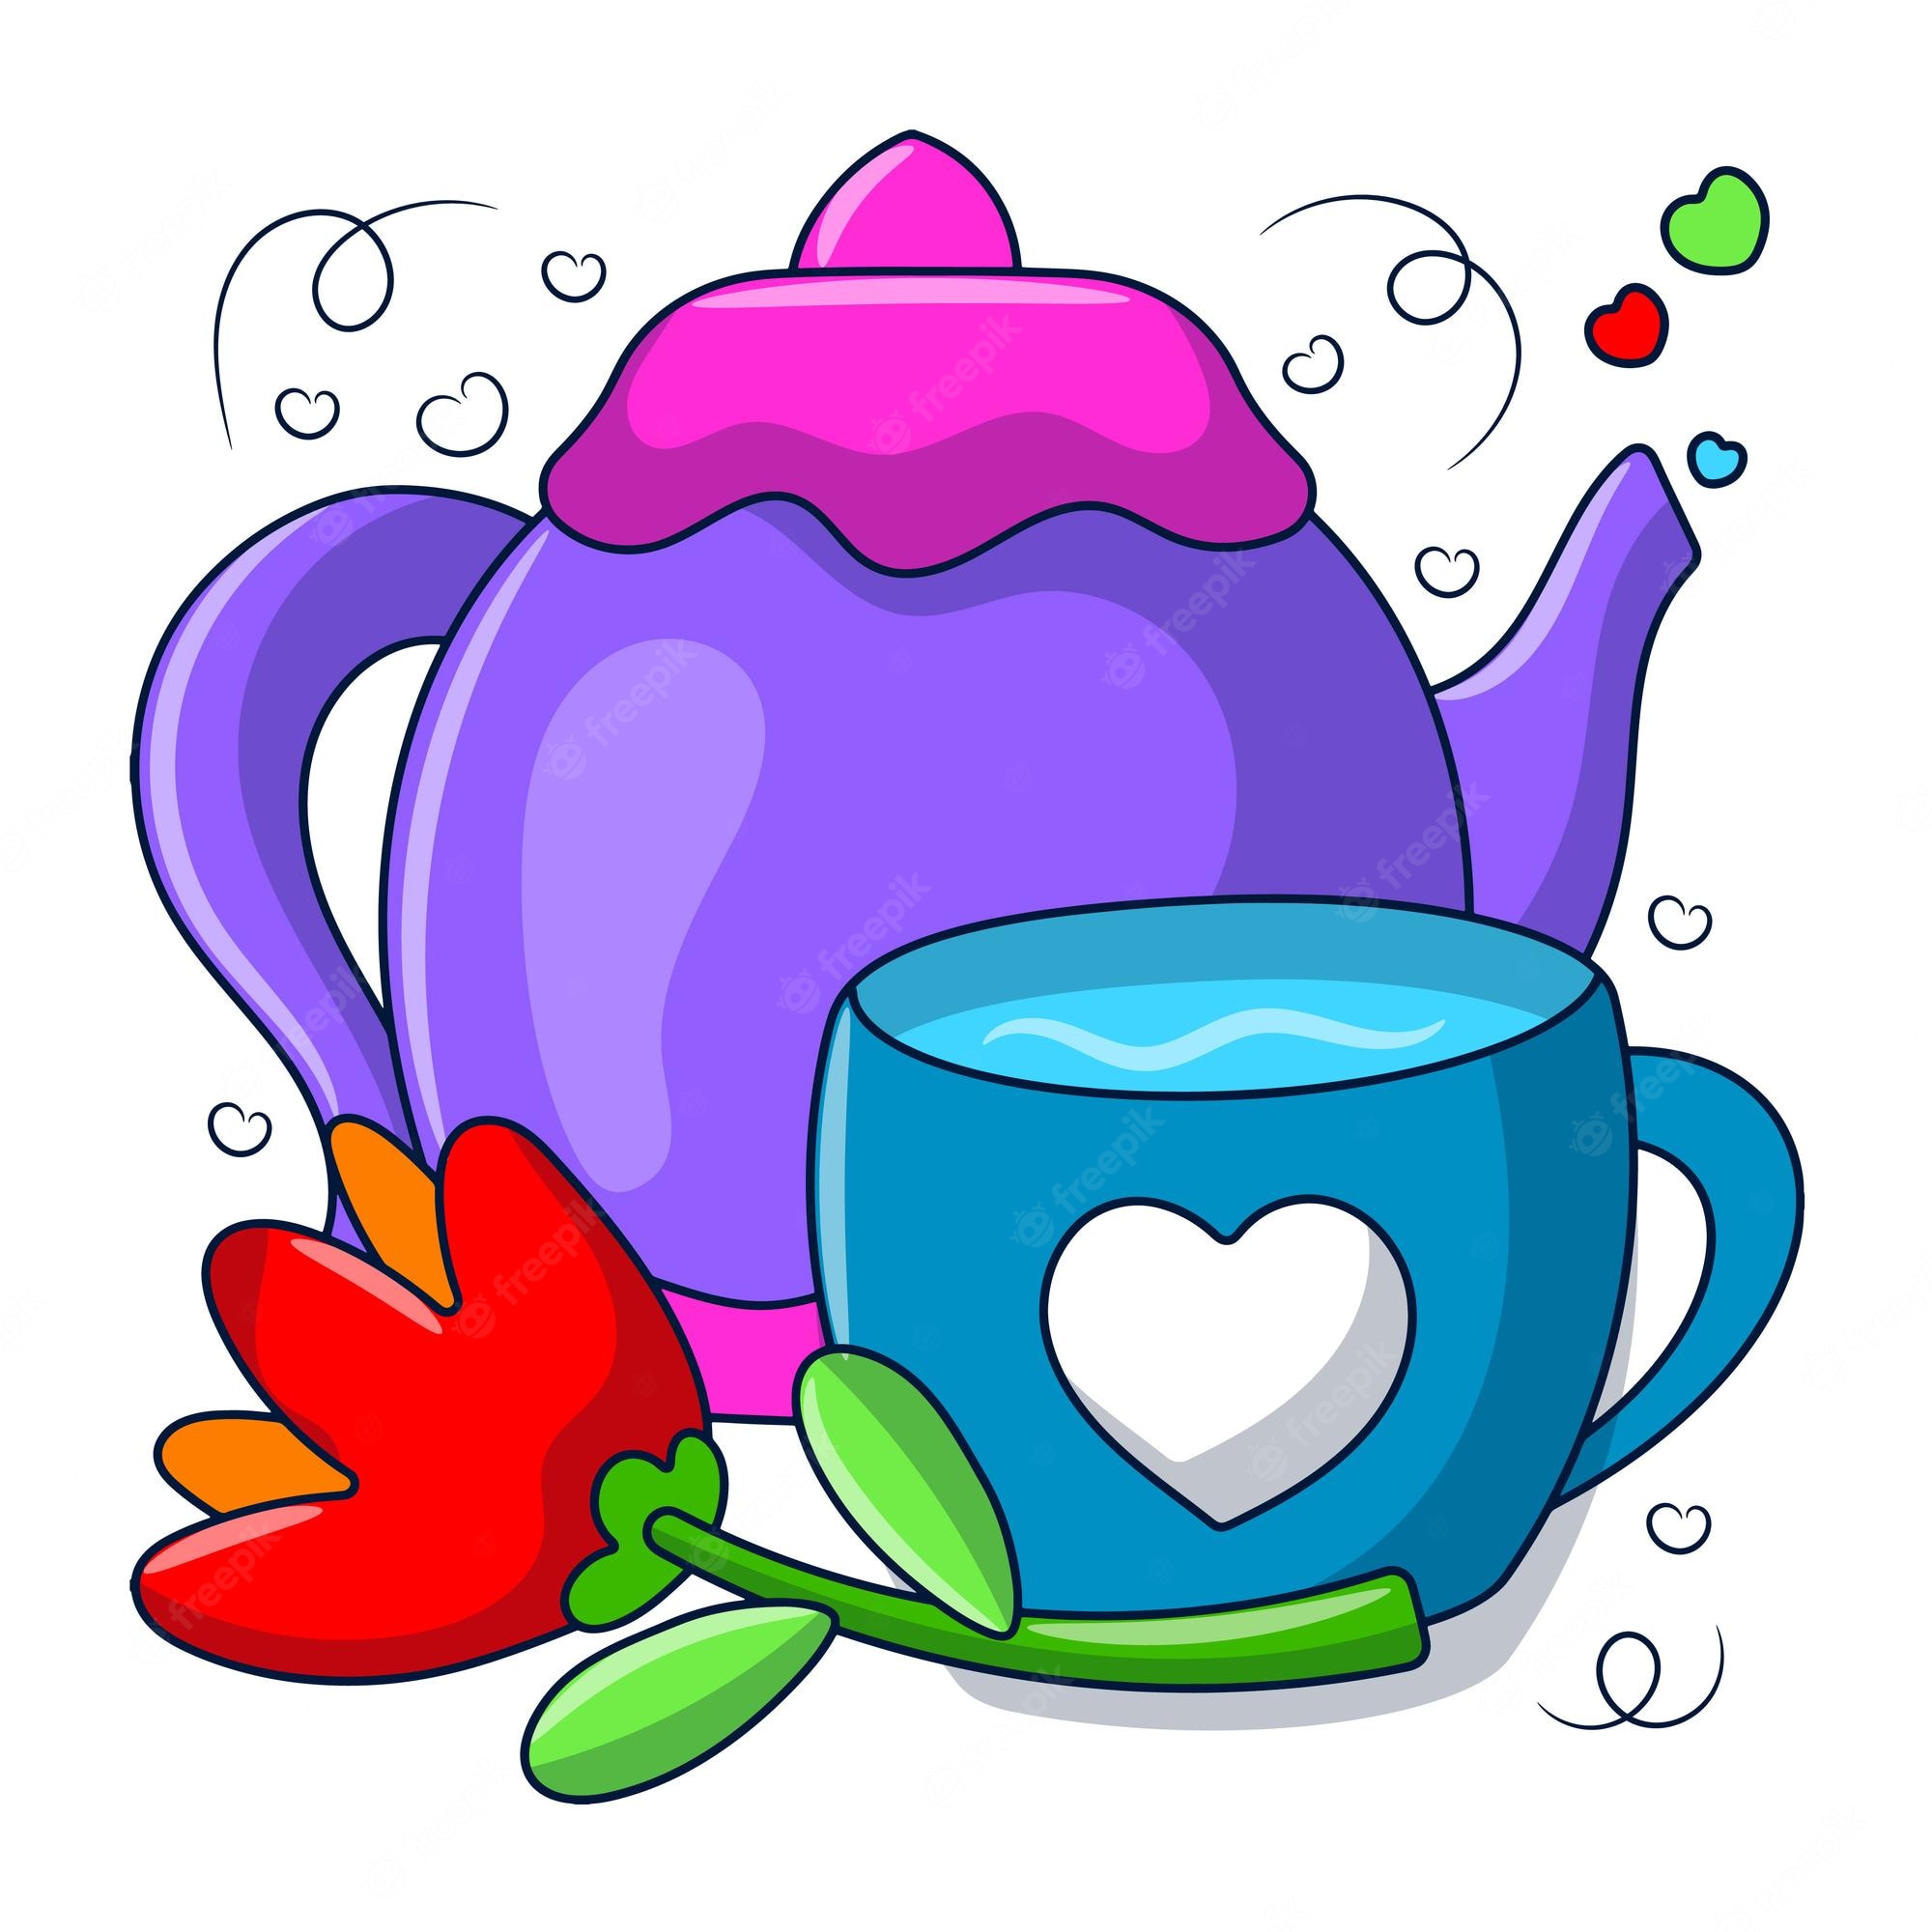 https://clipart-library.com/2023/drawing-teapot-drink-clipart-with-colored-hand-drawn-doodle-style_288411-1142.jpg